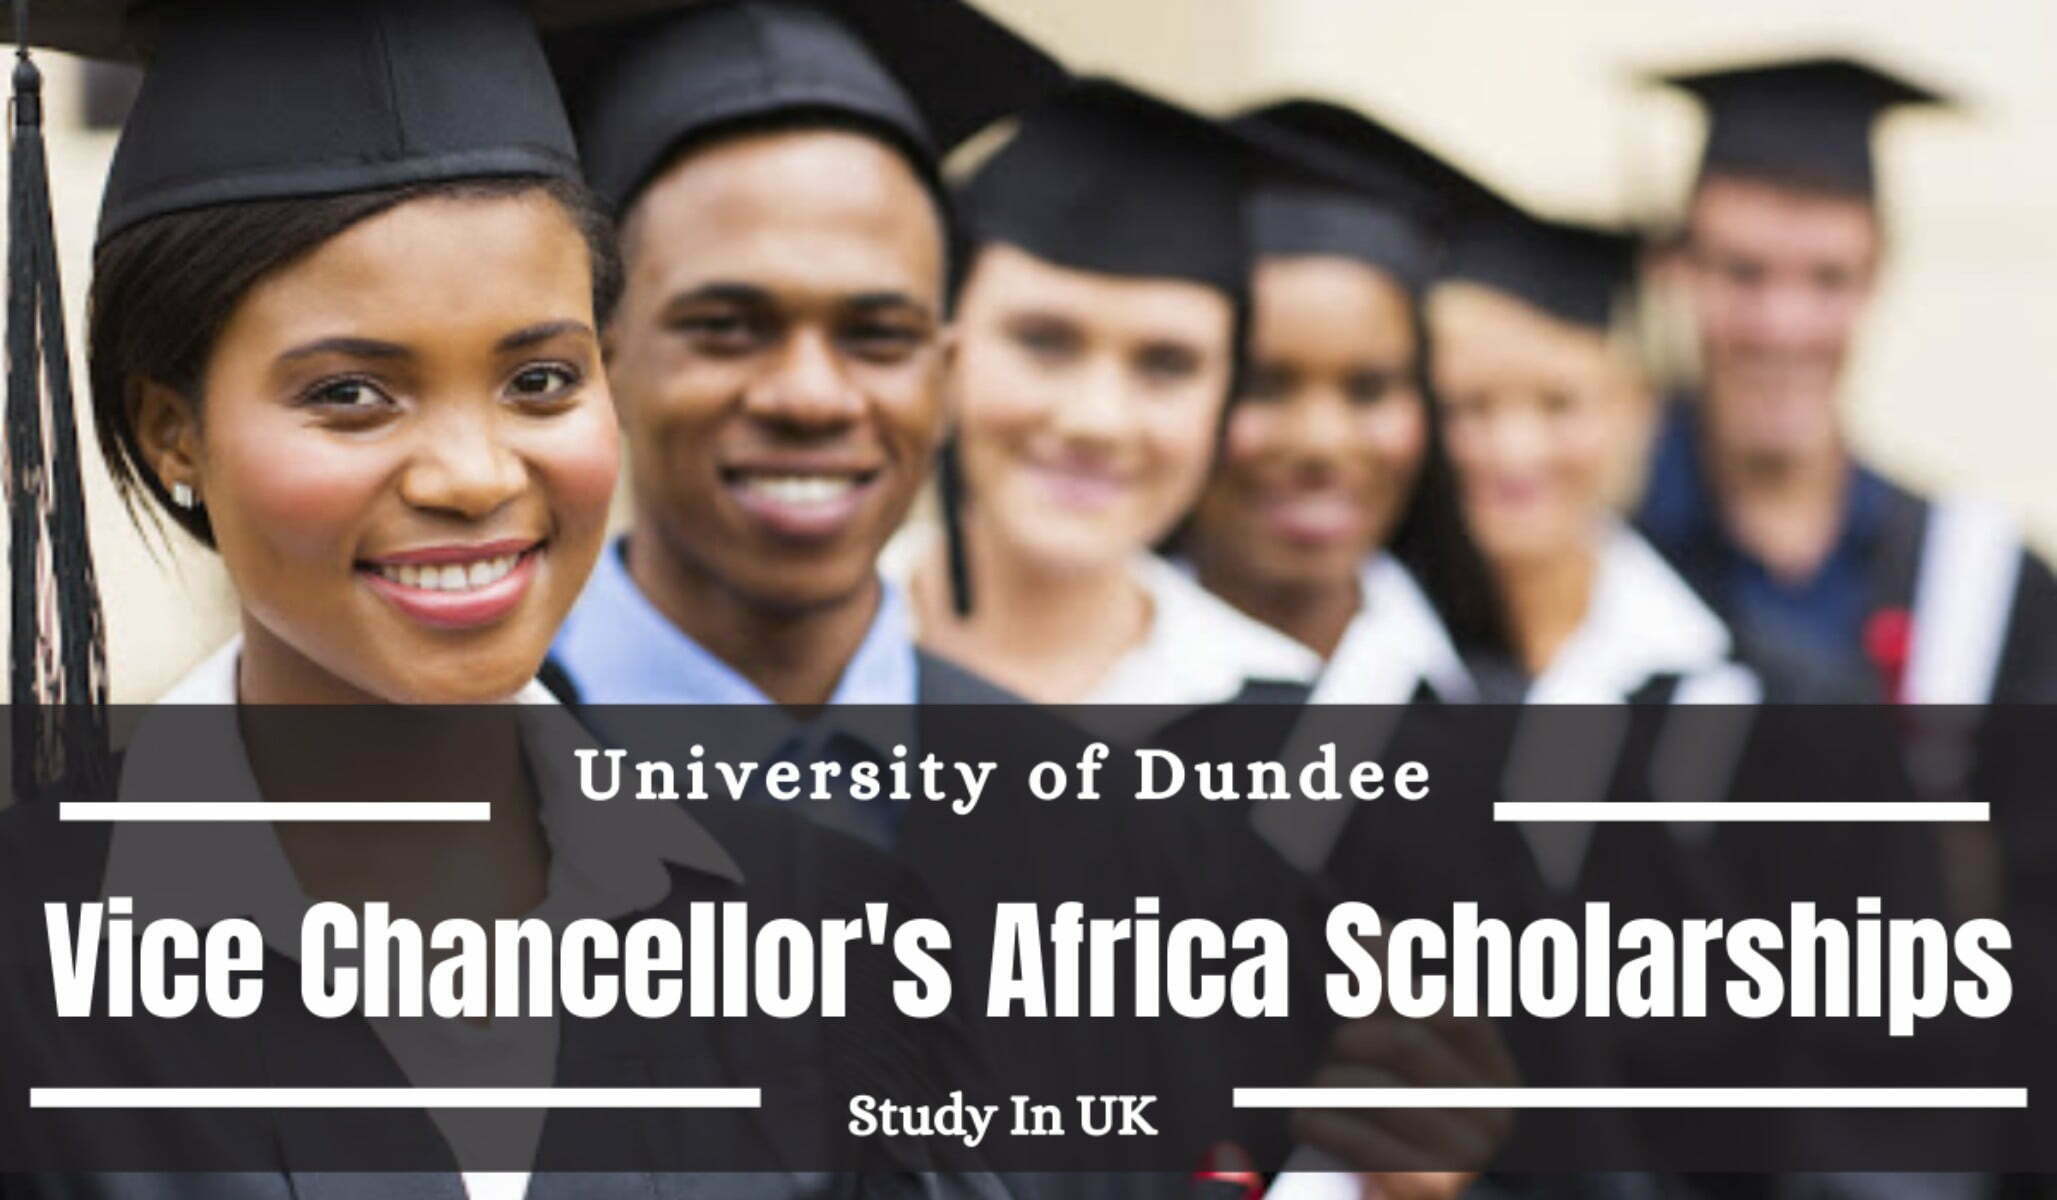 Vice Chancellor’s Africa Scholarship 2023 at the University of Dundee